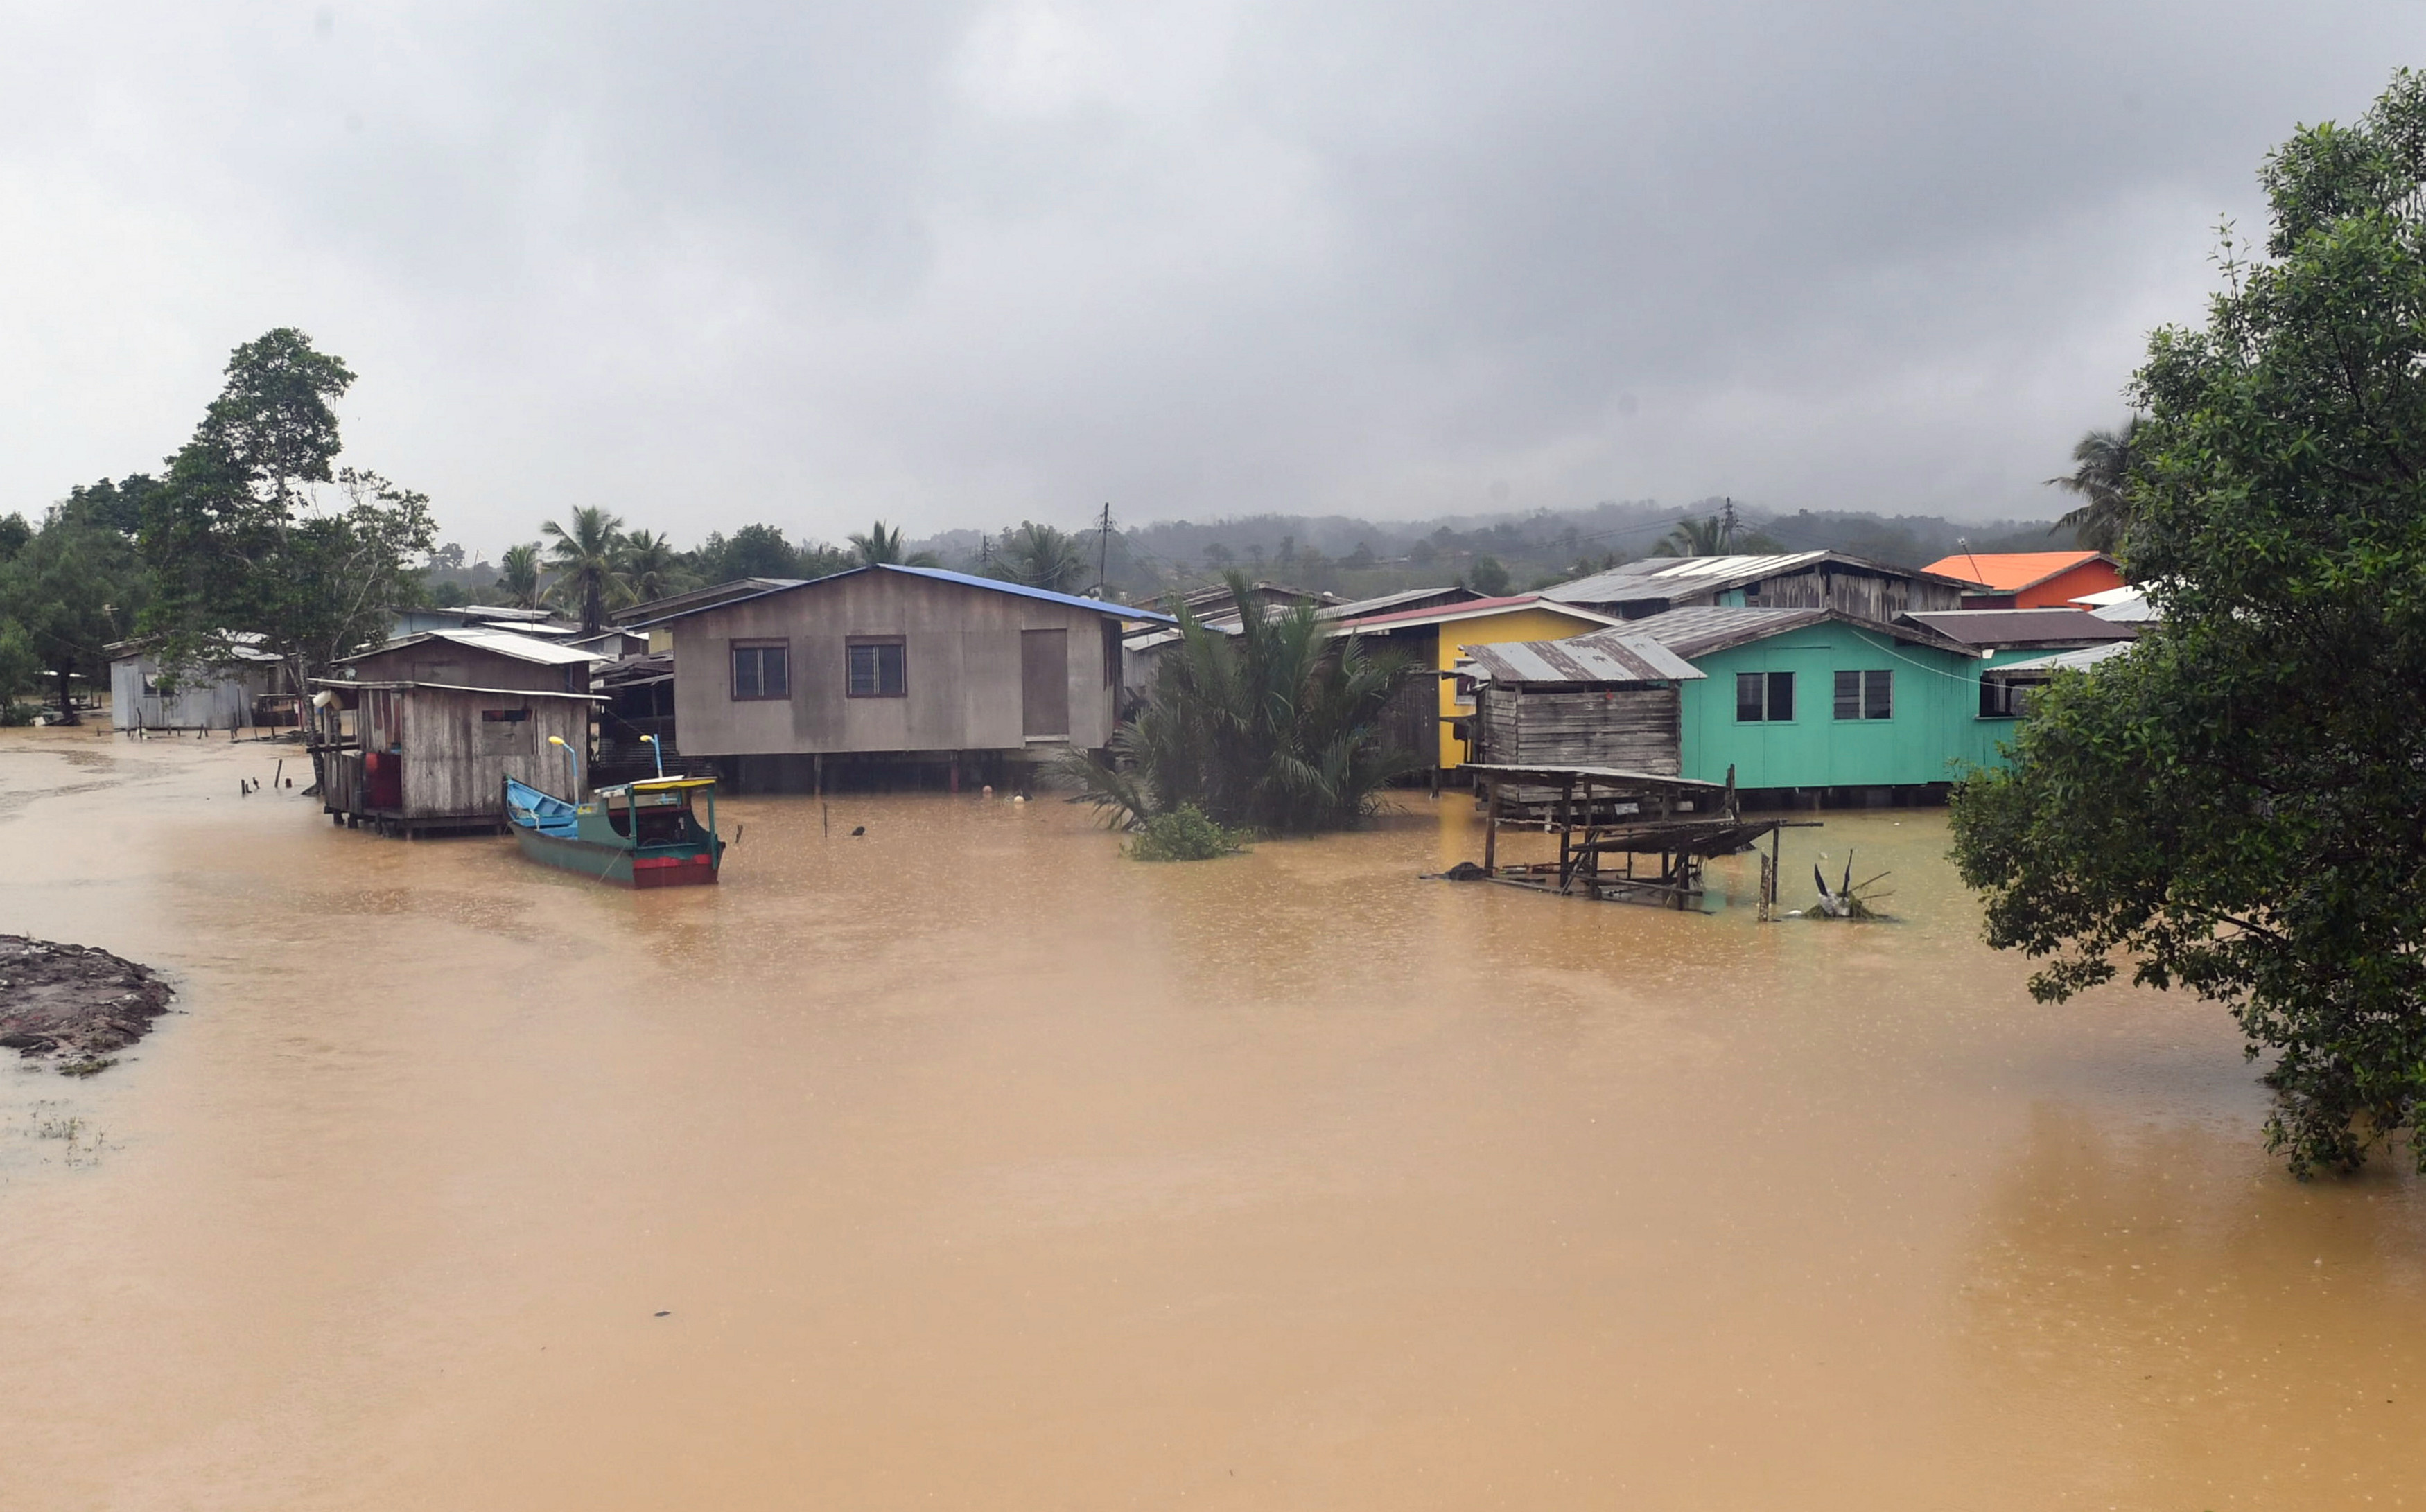 Floods: Number of Evacuees in Malaysia’s Sabah Increases to 1,680 Tuesday Morning